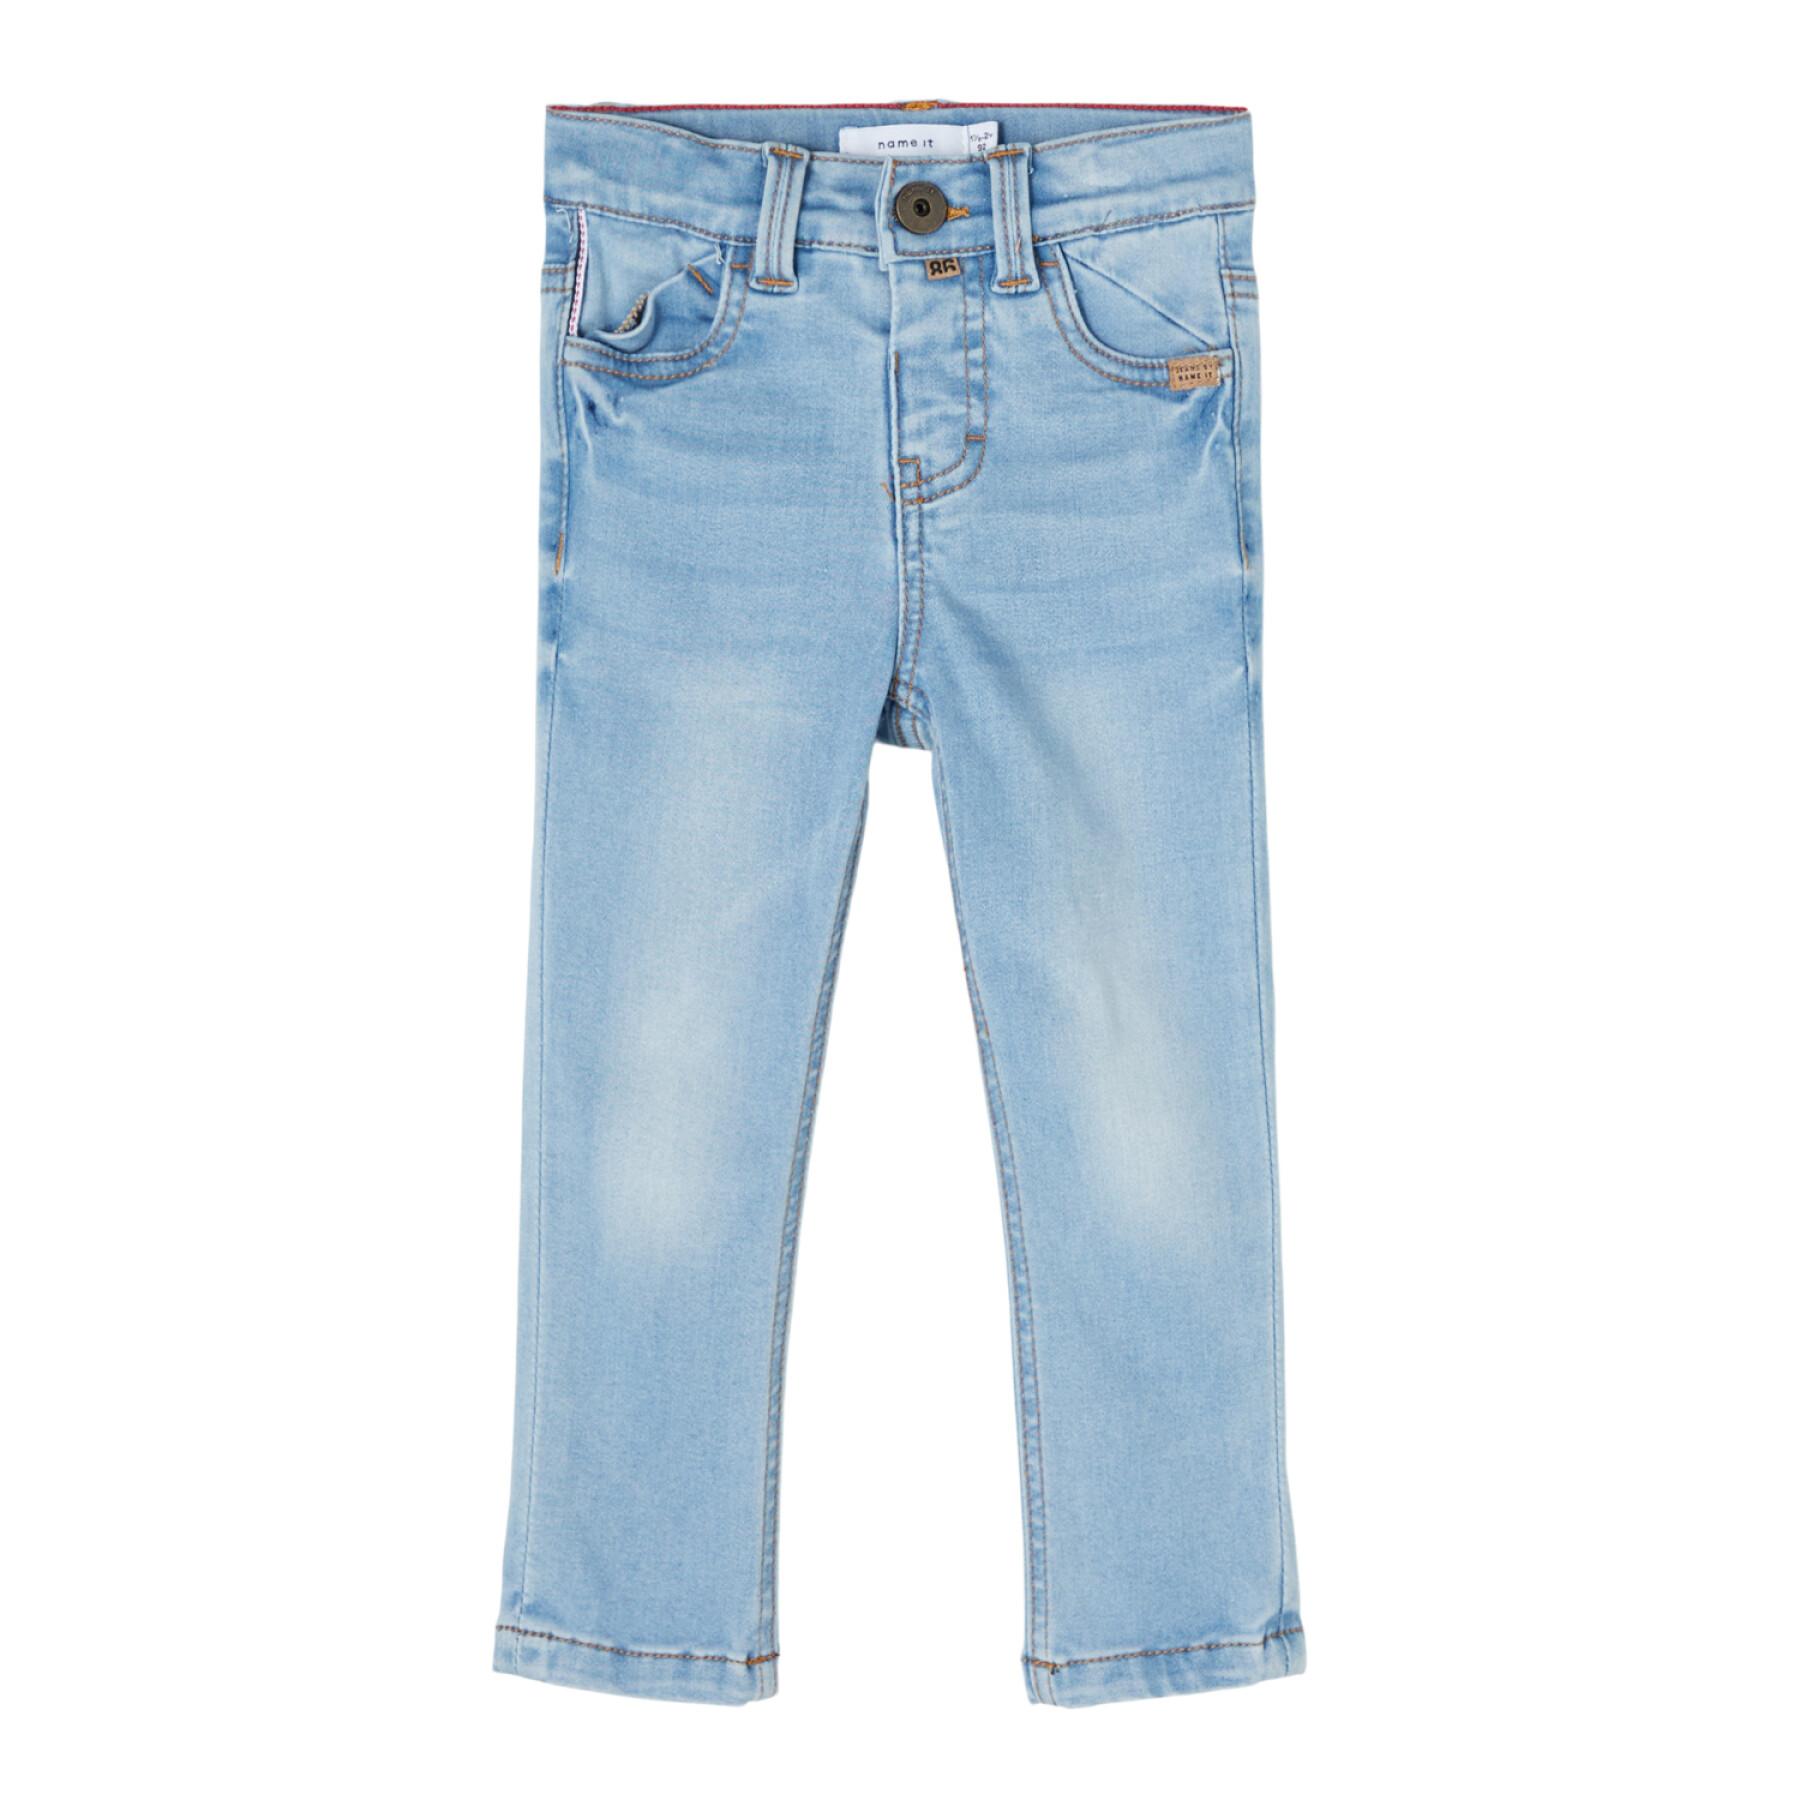 Jeans per bambini Name it Theo Clas